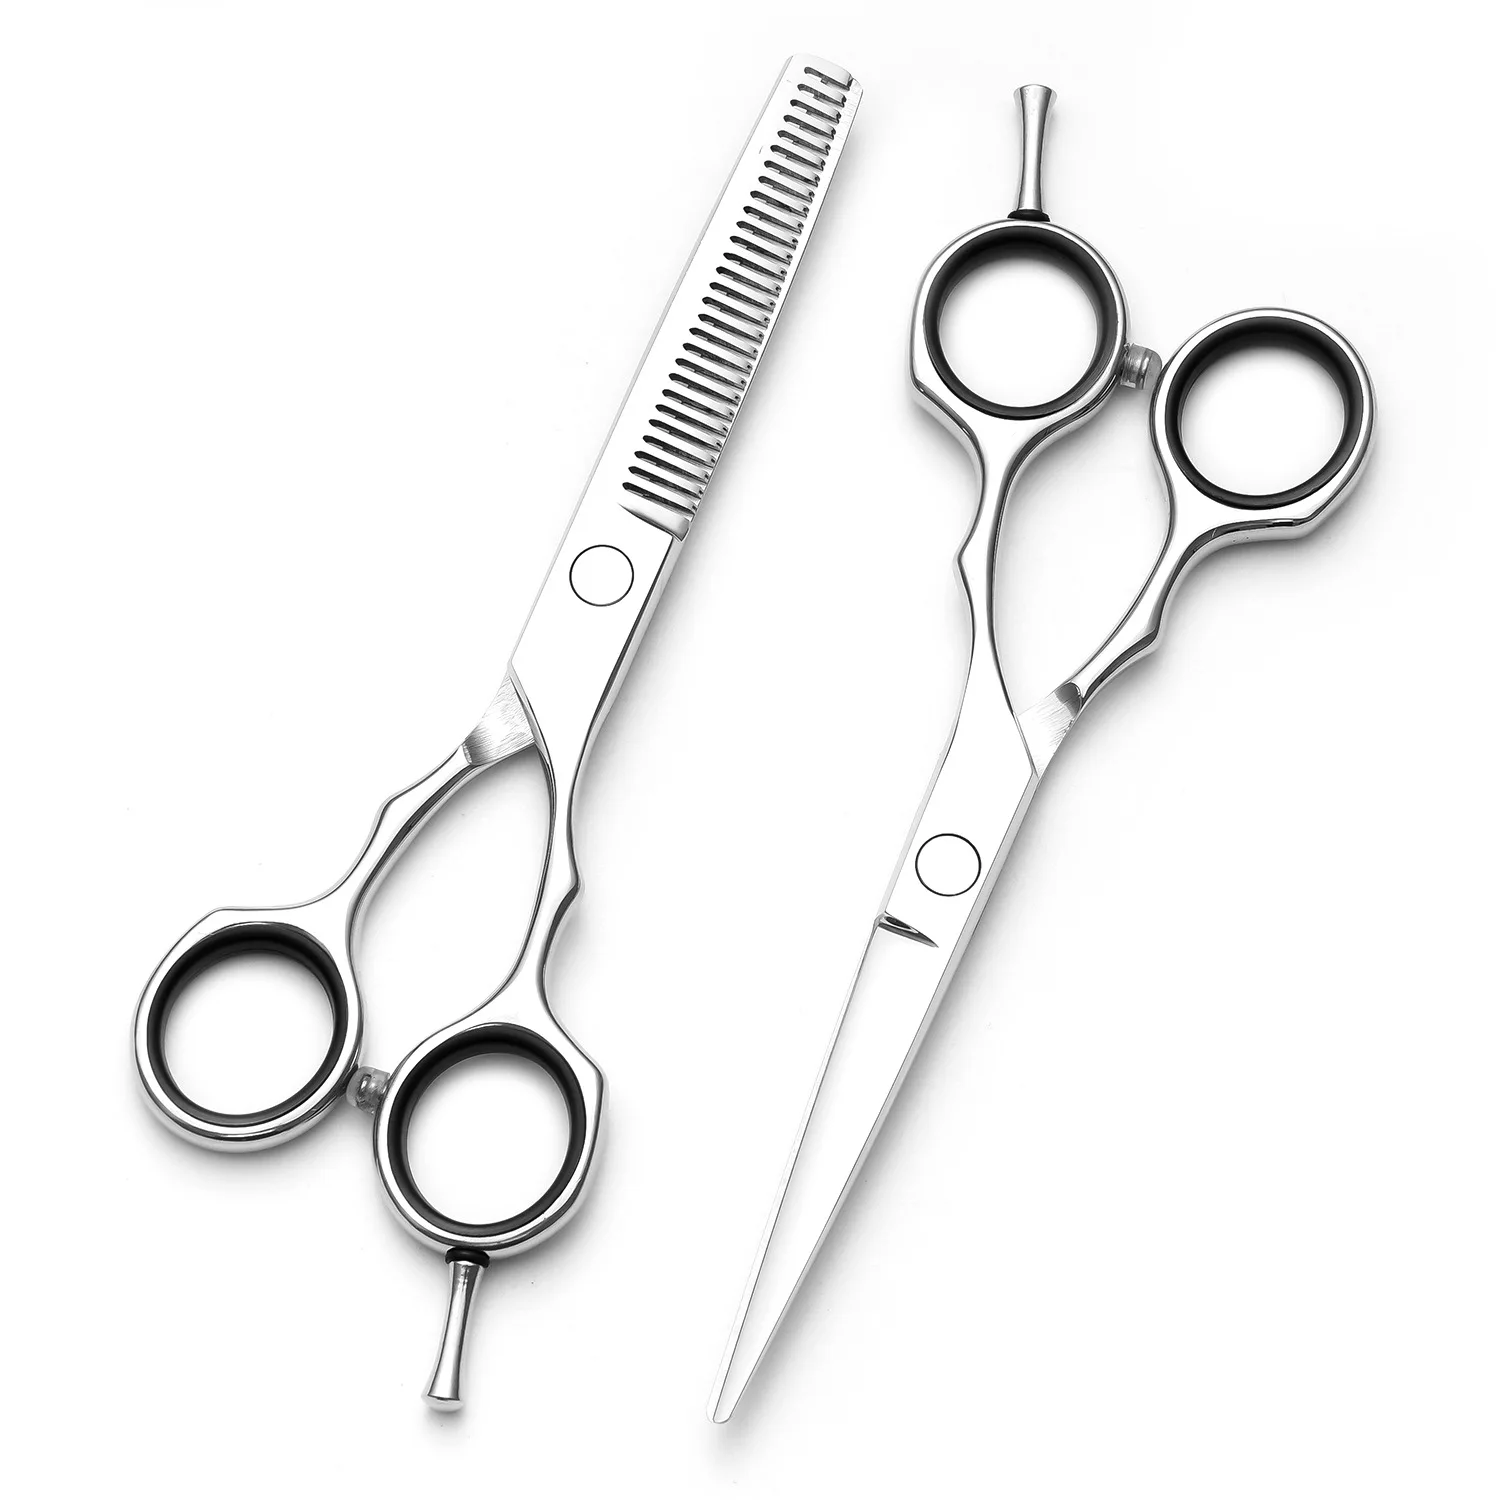 5.5 inch hairdressing scissors professional flat cutting thinning hairstylist hairdressing set hair cutting scissors